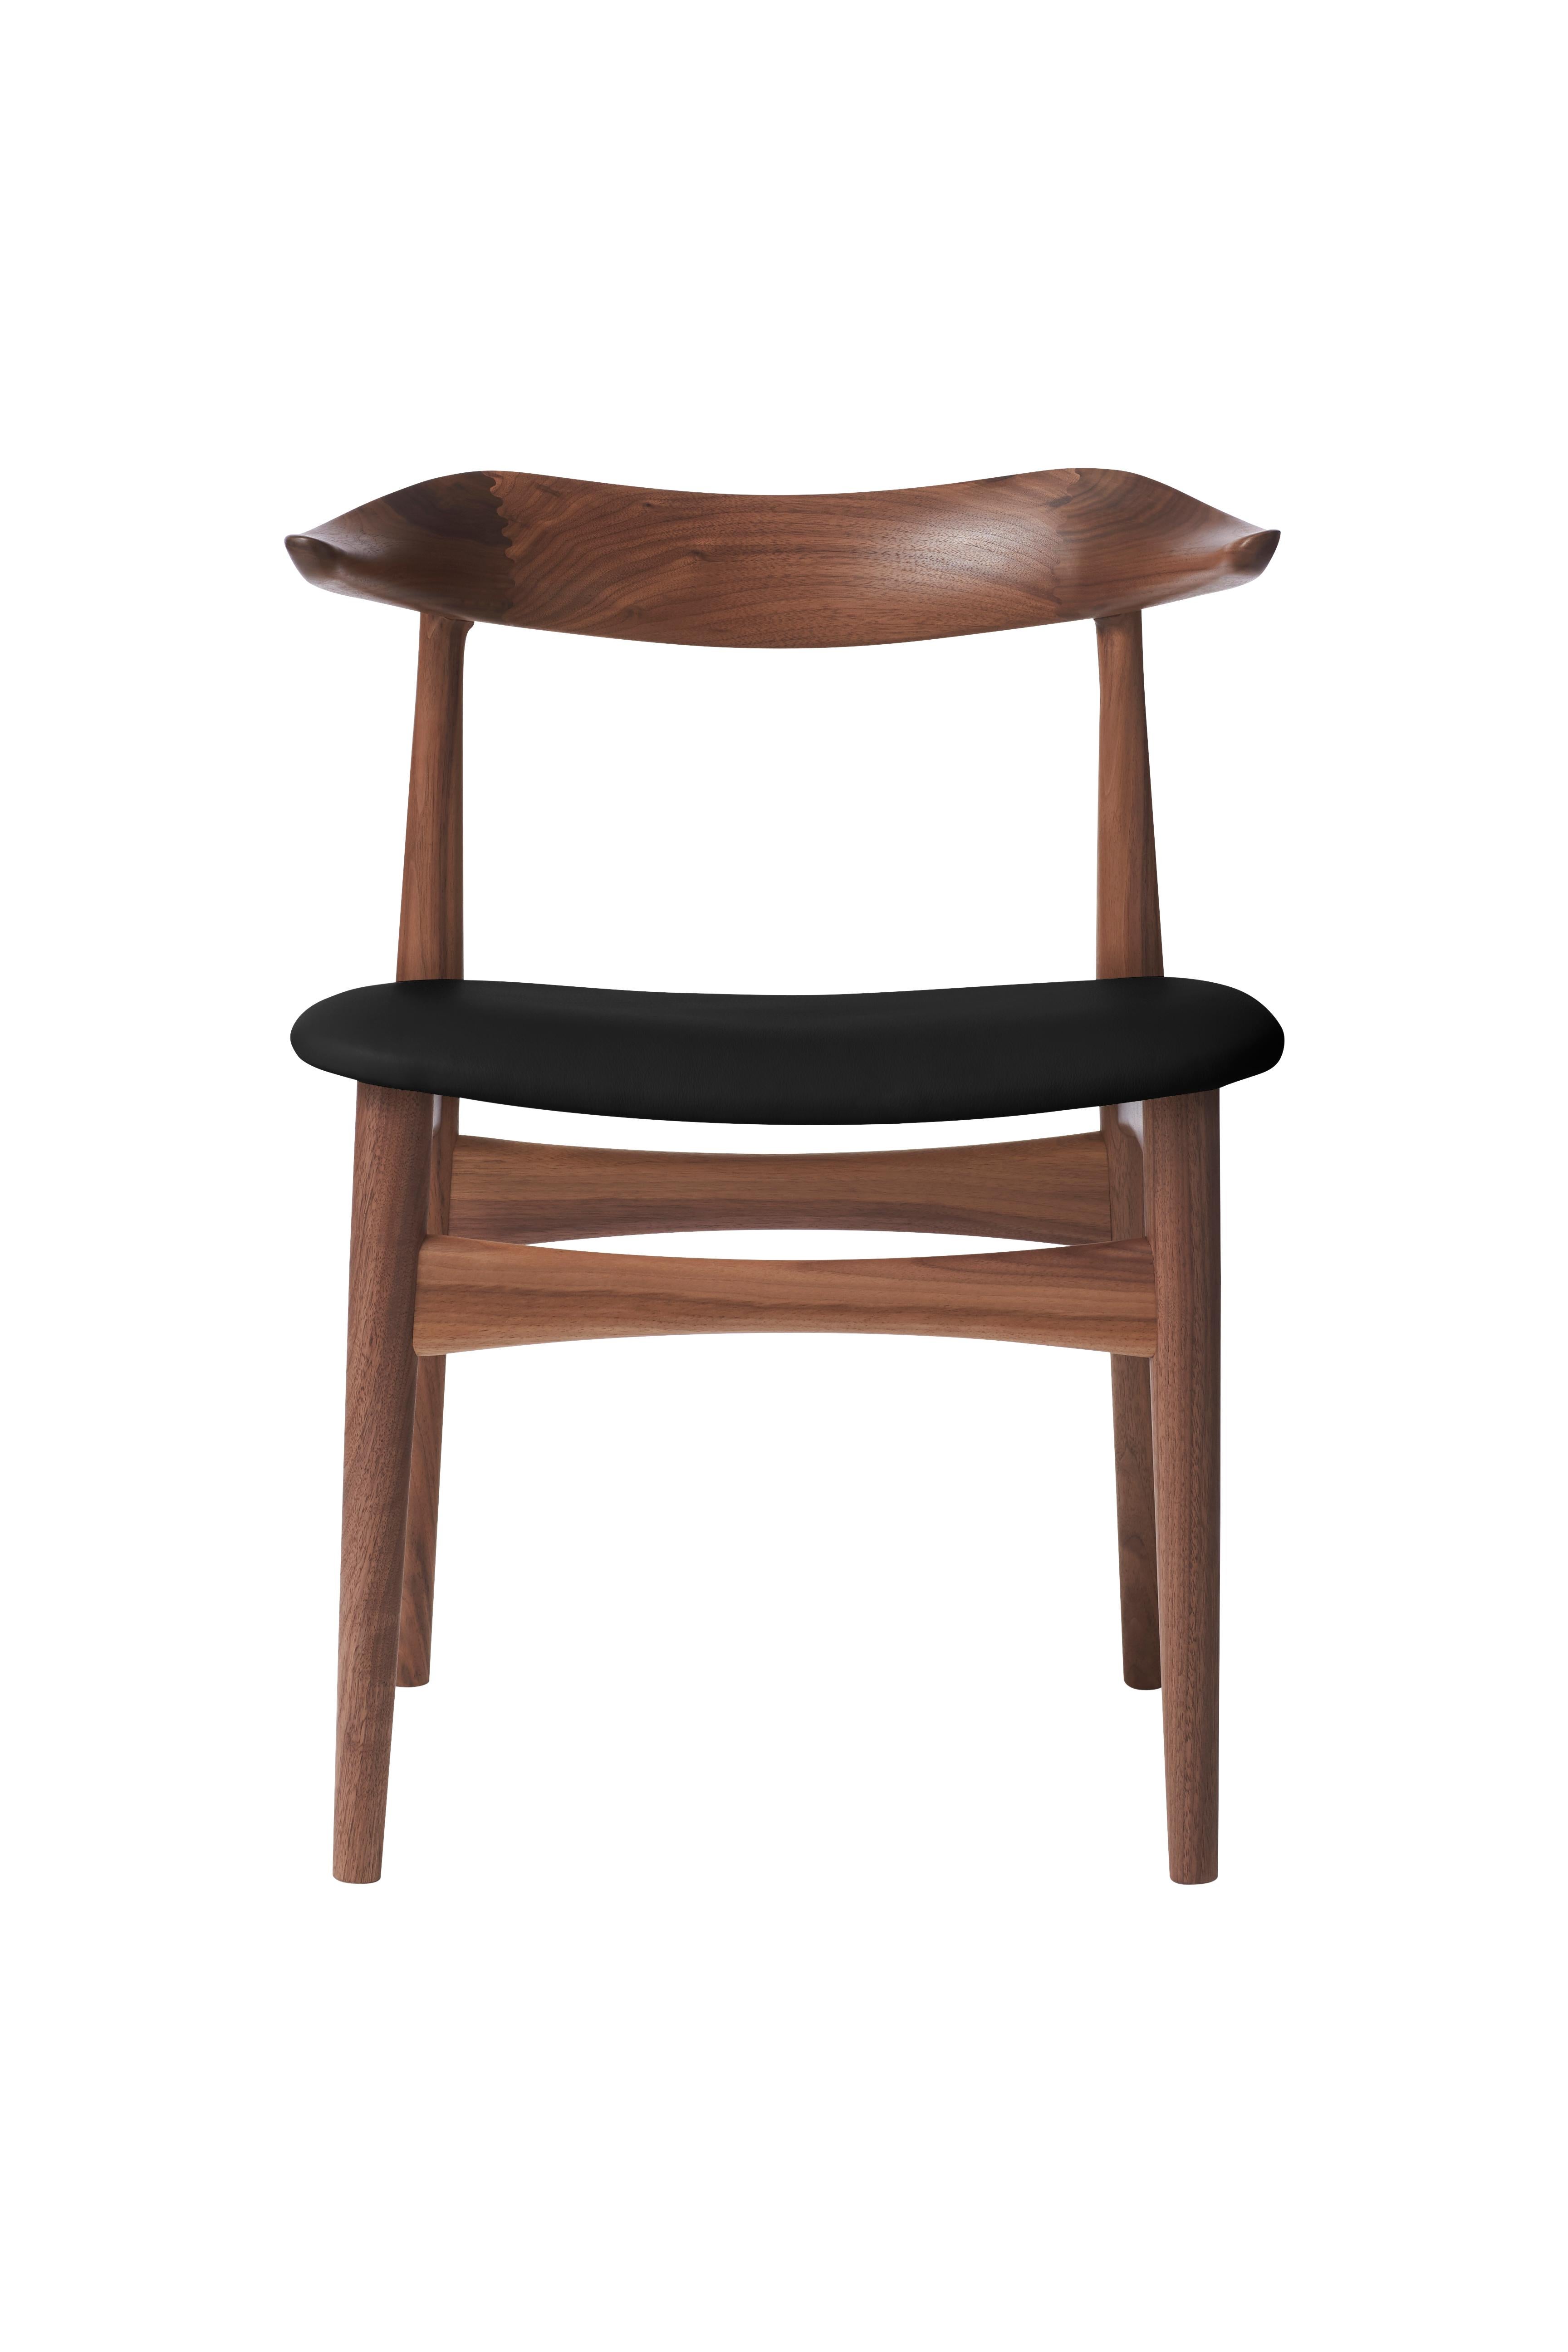 For Sale: Black (Prescott 207) Cow Horn Walnut Chair, by Knud Færch from Warm Nordic